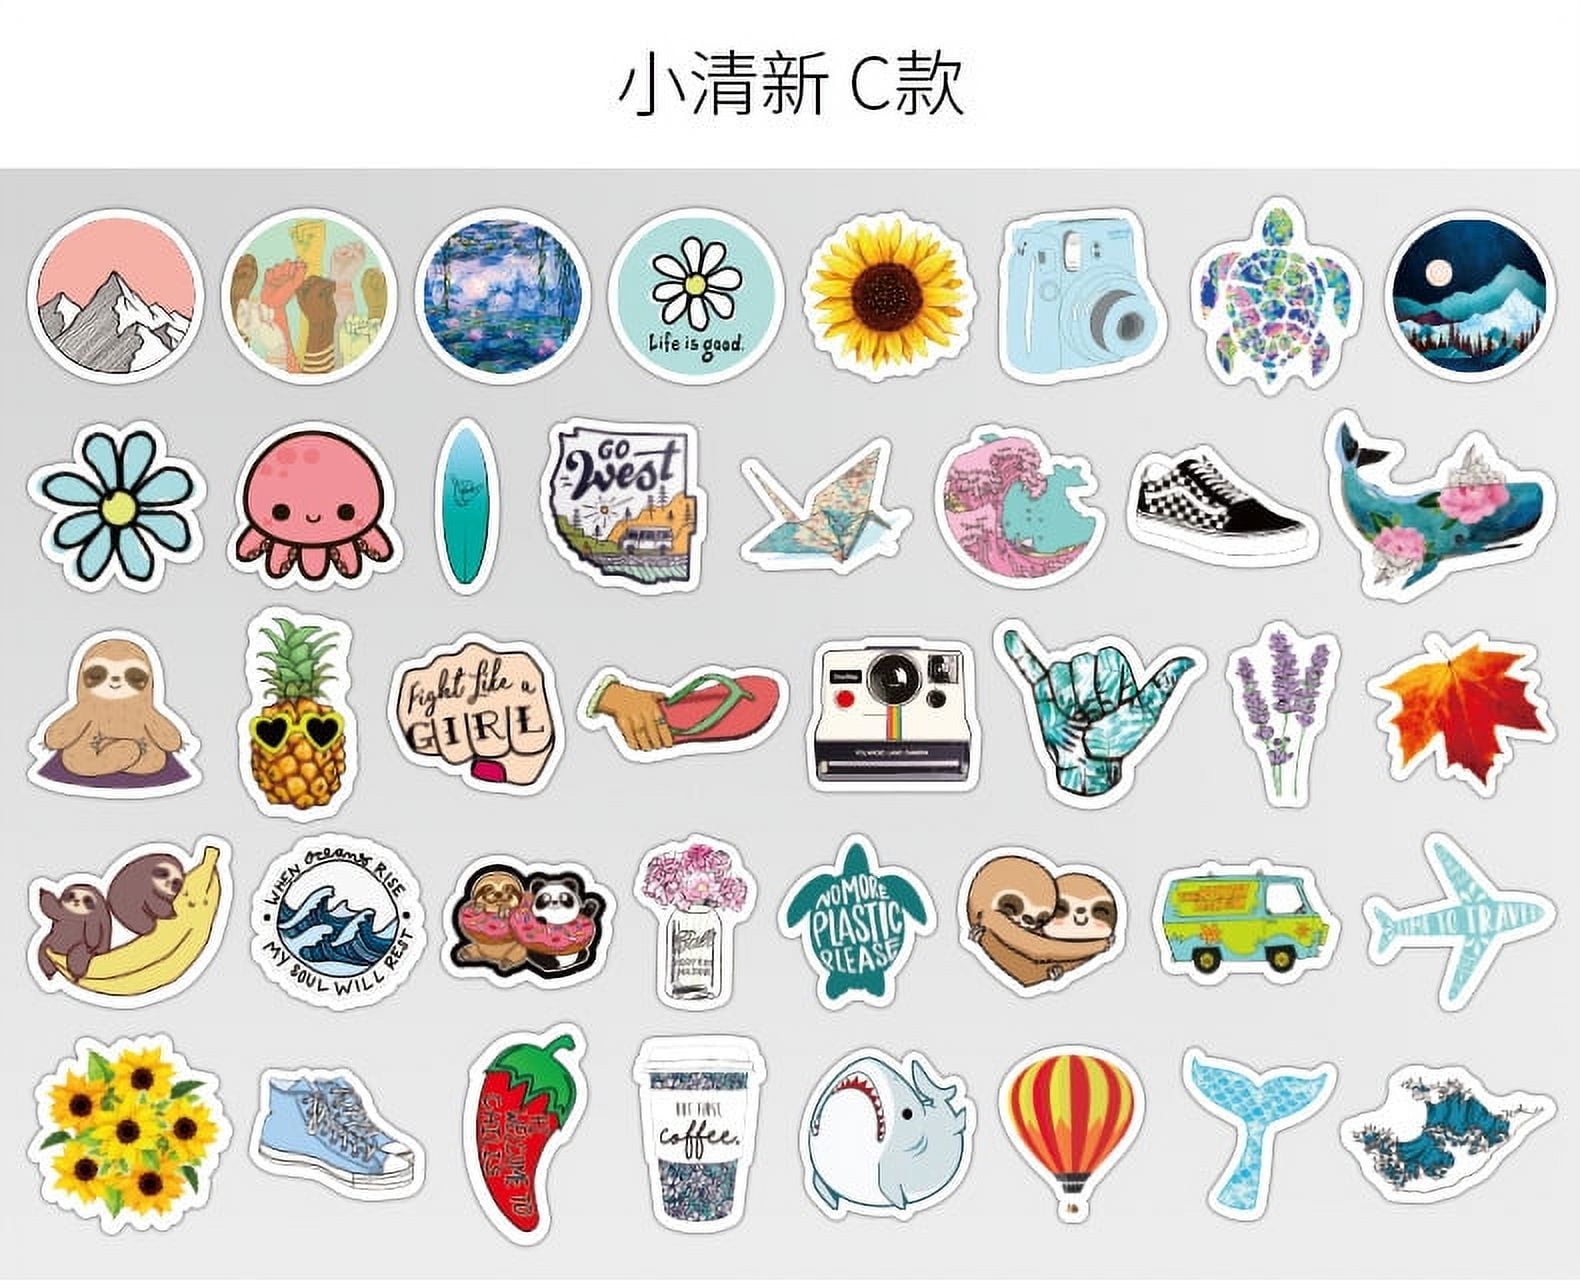 Cool Things Stickers, Stickers Skateboard Vsco Girl